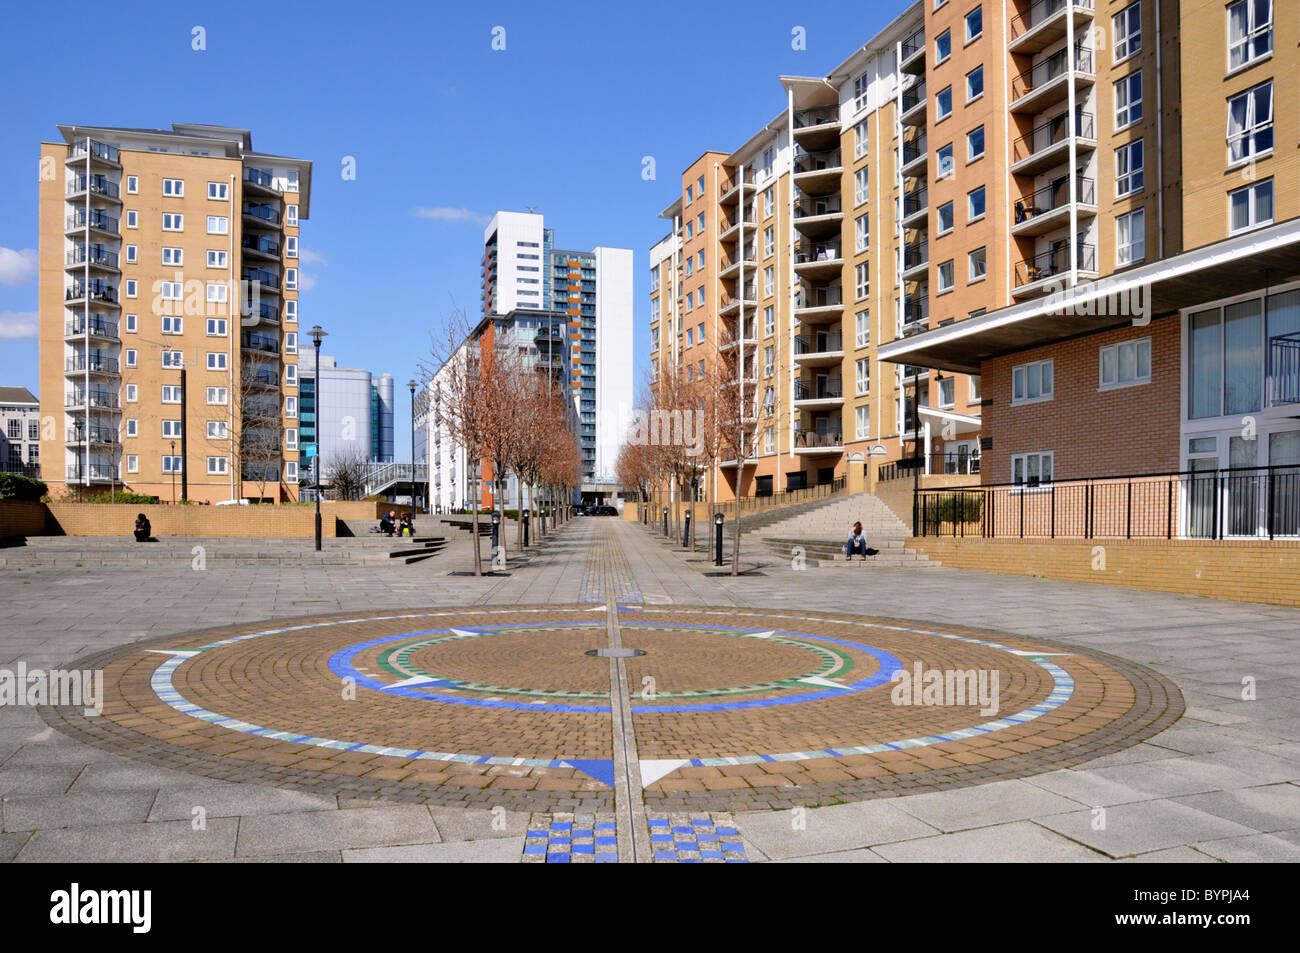 Paved landscaping & modern housing estate high rise apartment homes & flats near East India DLR station Blackwall Tower Hamlets East London England UK Stock Photo